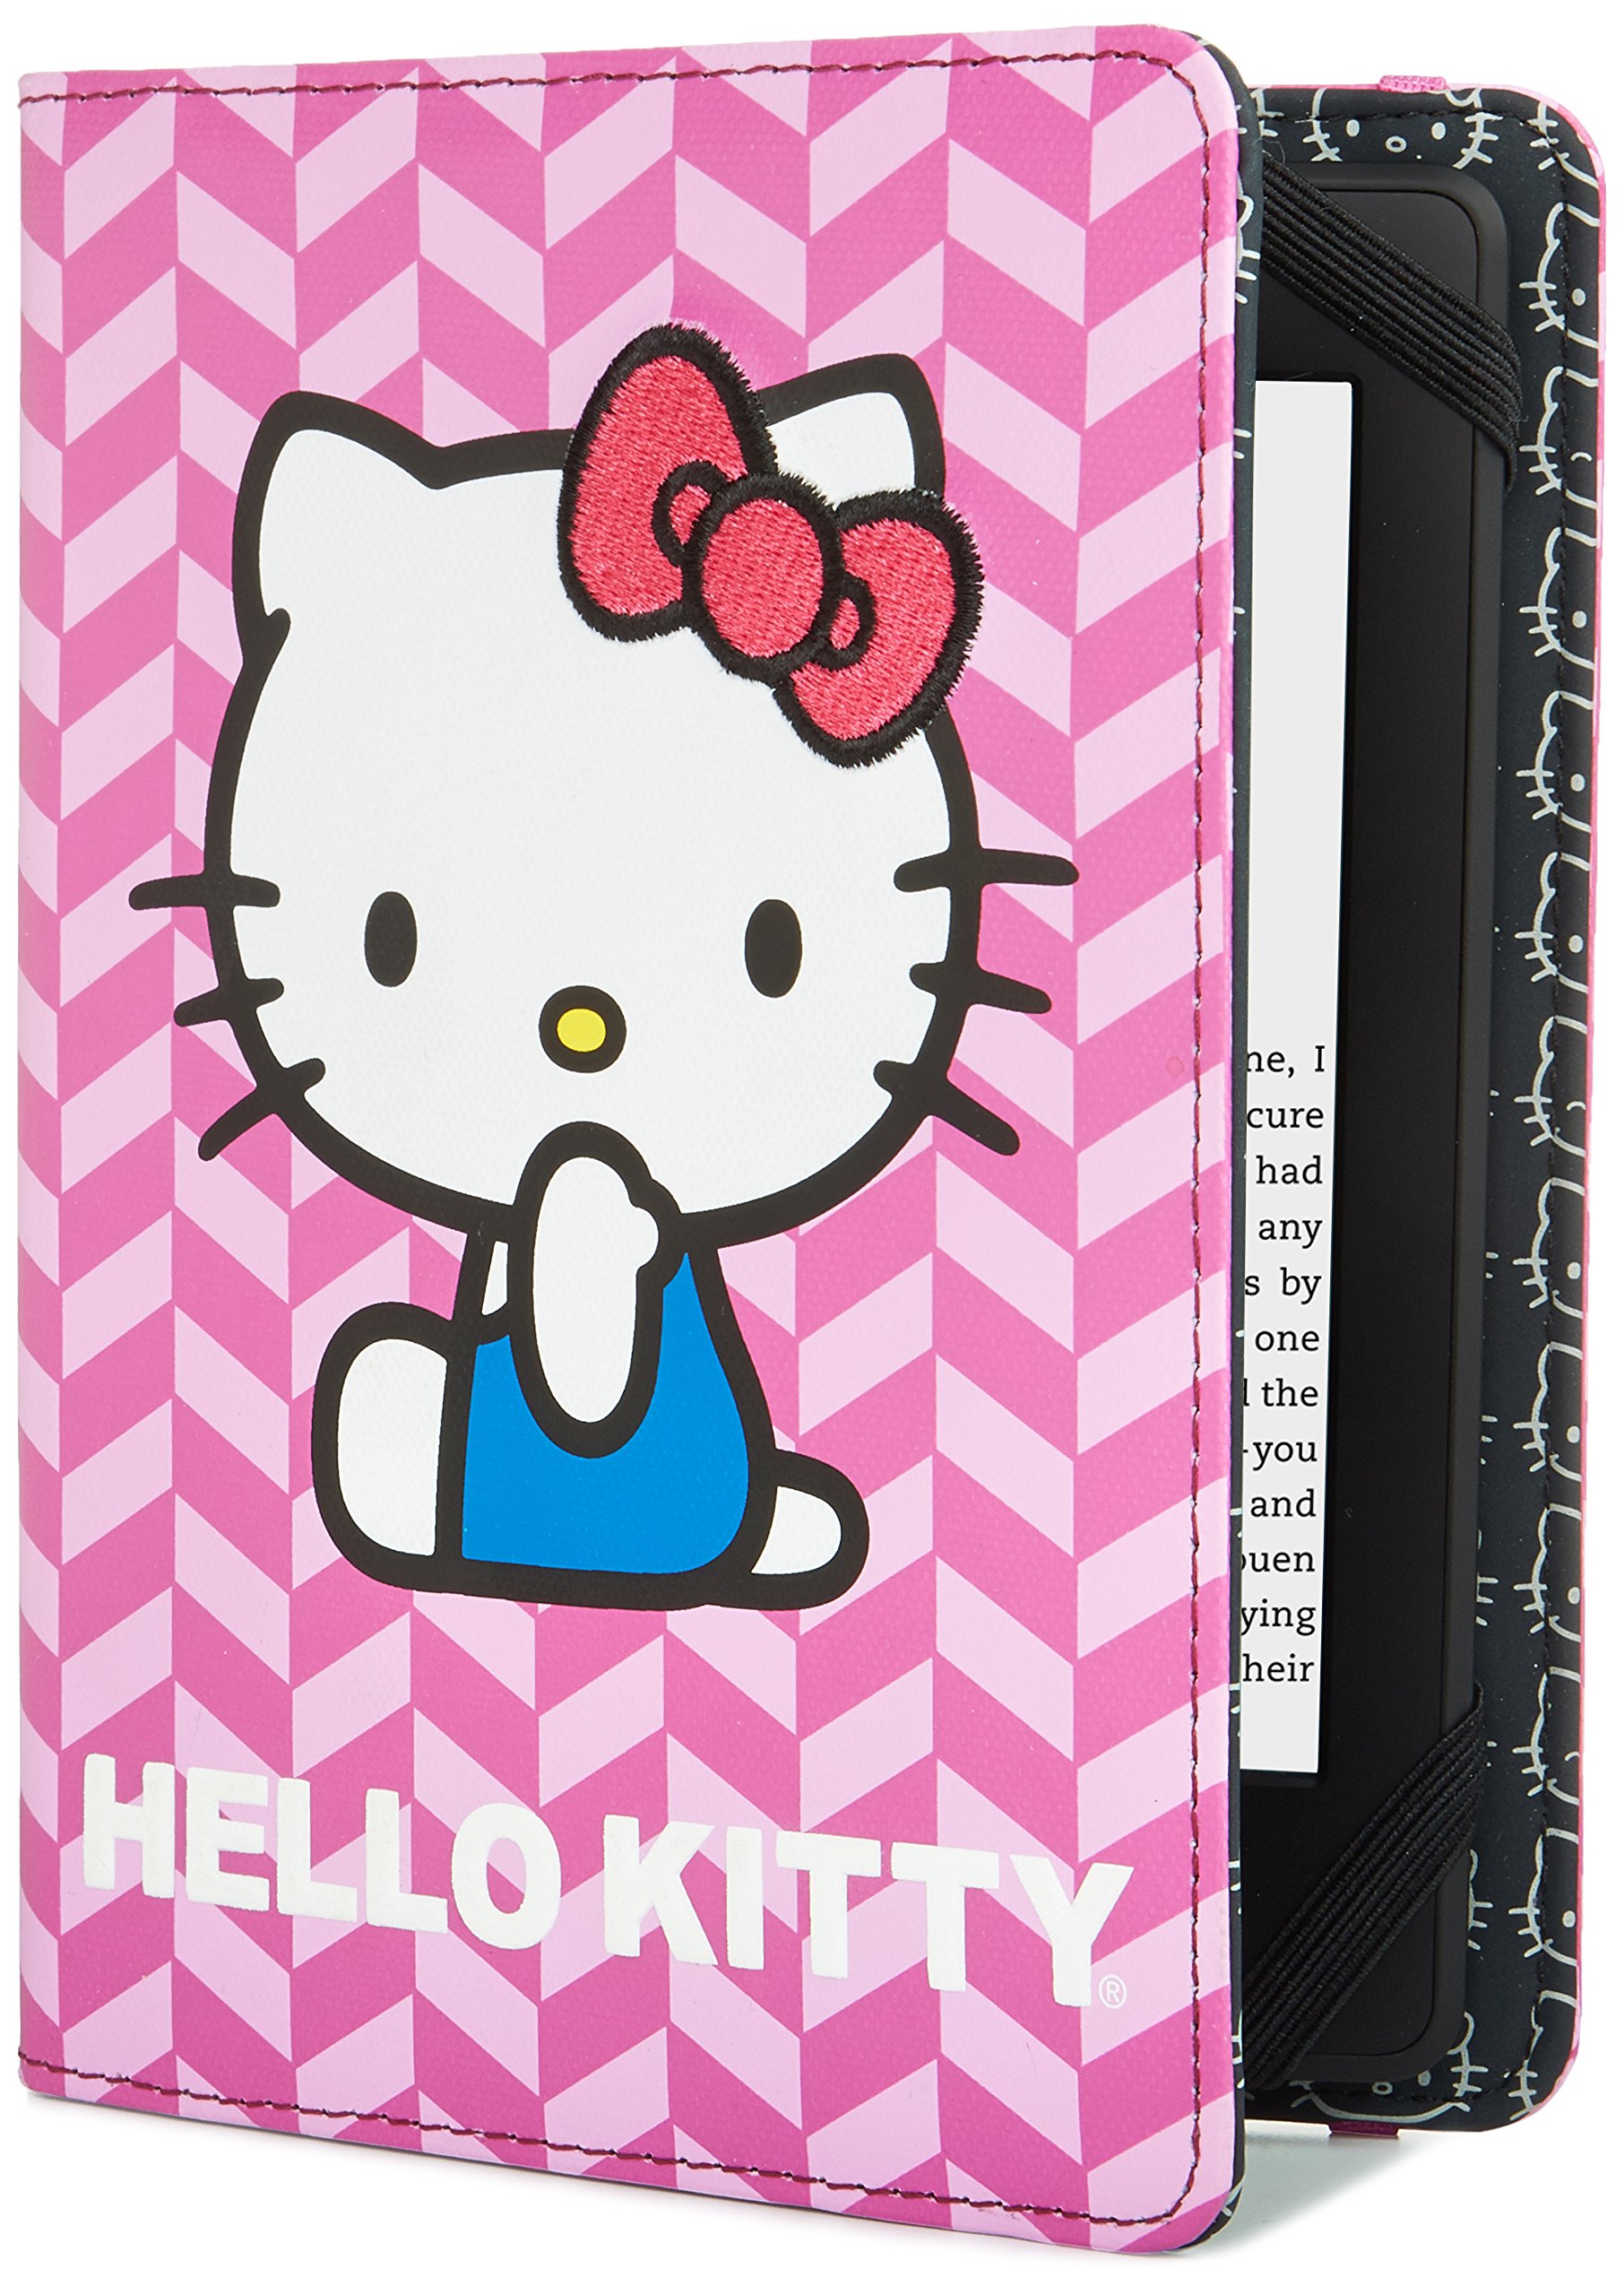 Hello Kitty Chevron Cover - Purple (Fits Kindle Paperwhite, Kindle & Kindle Touch)